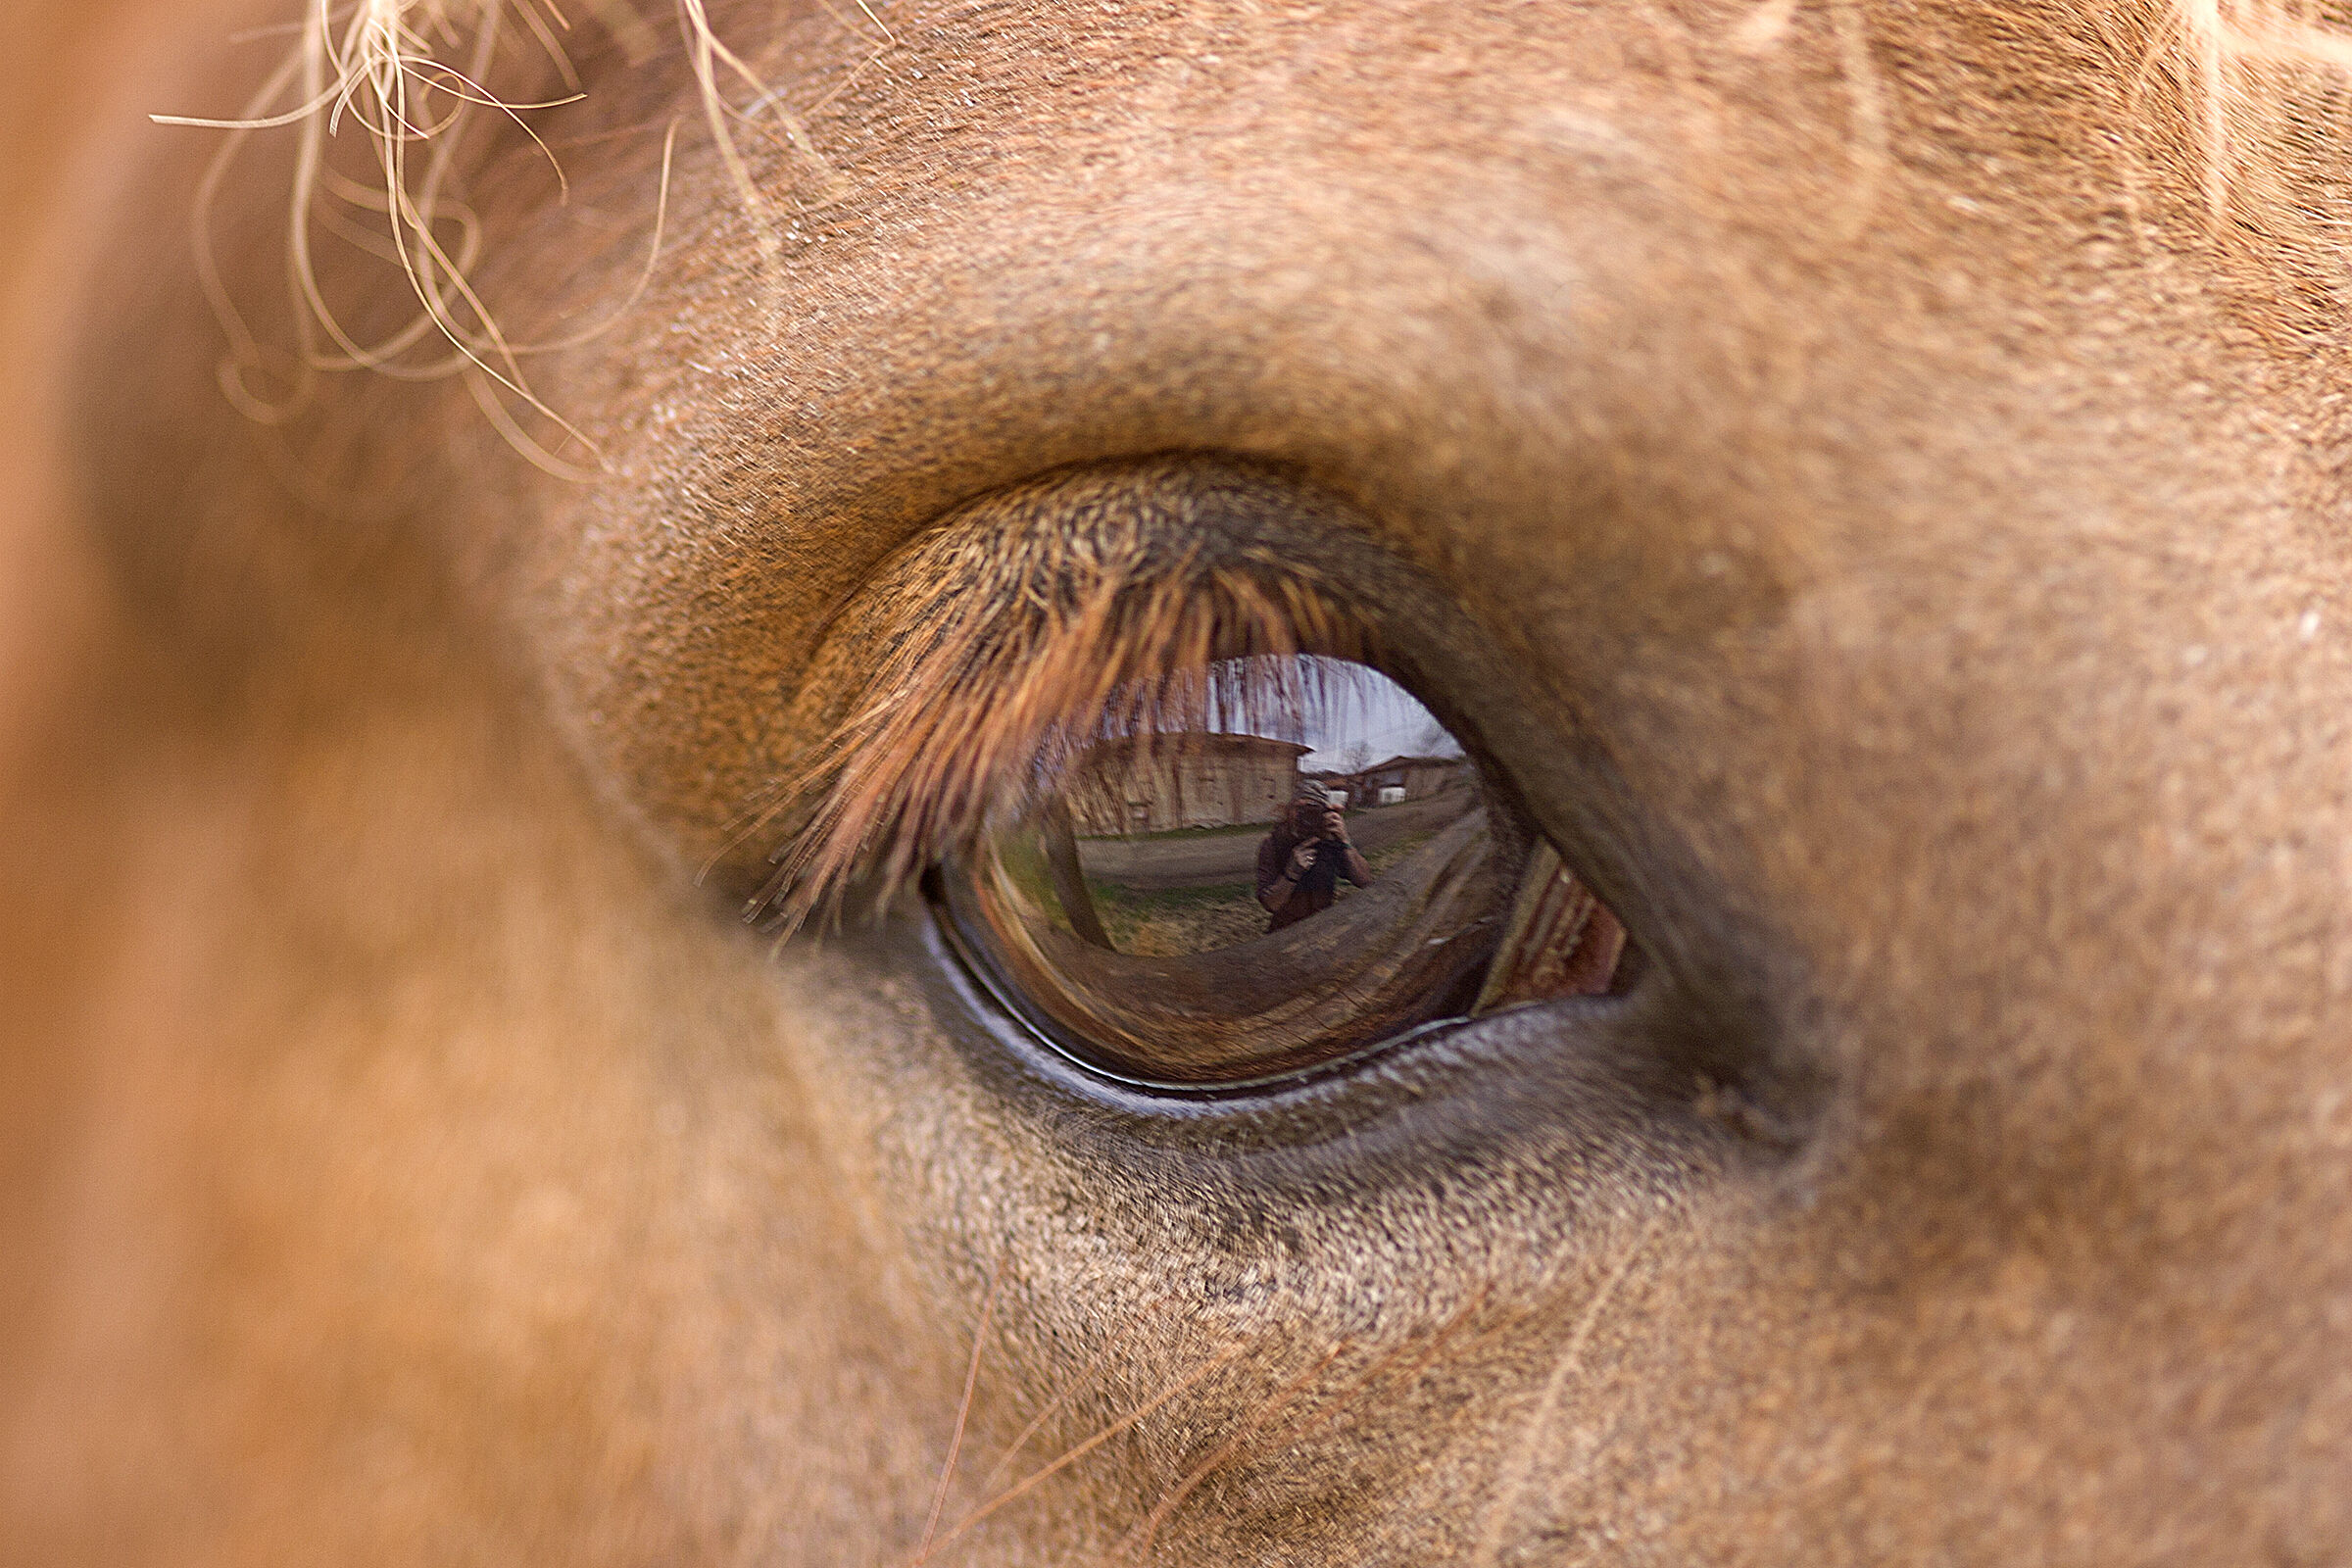 In the eye of the horse...